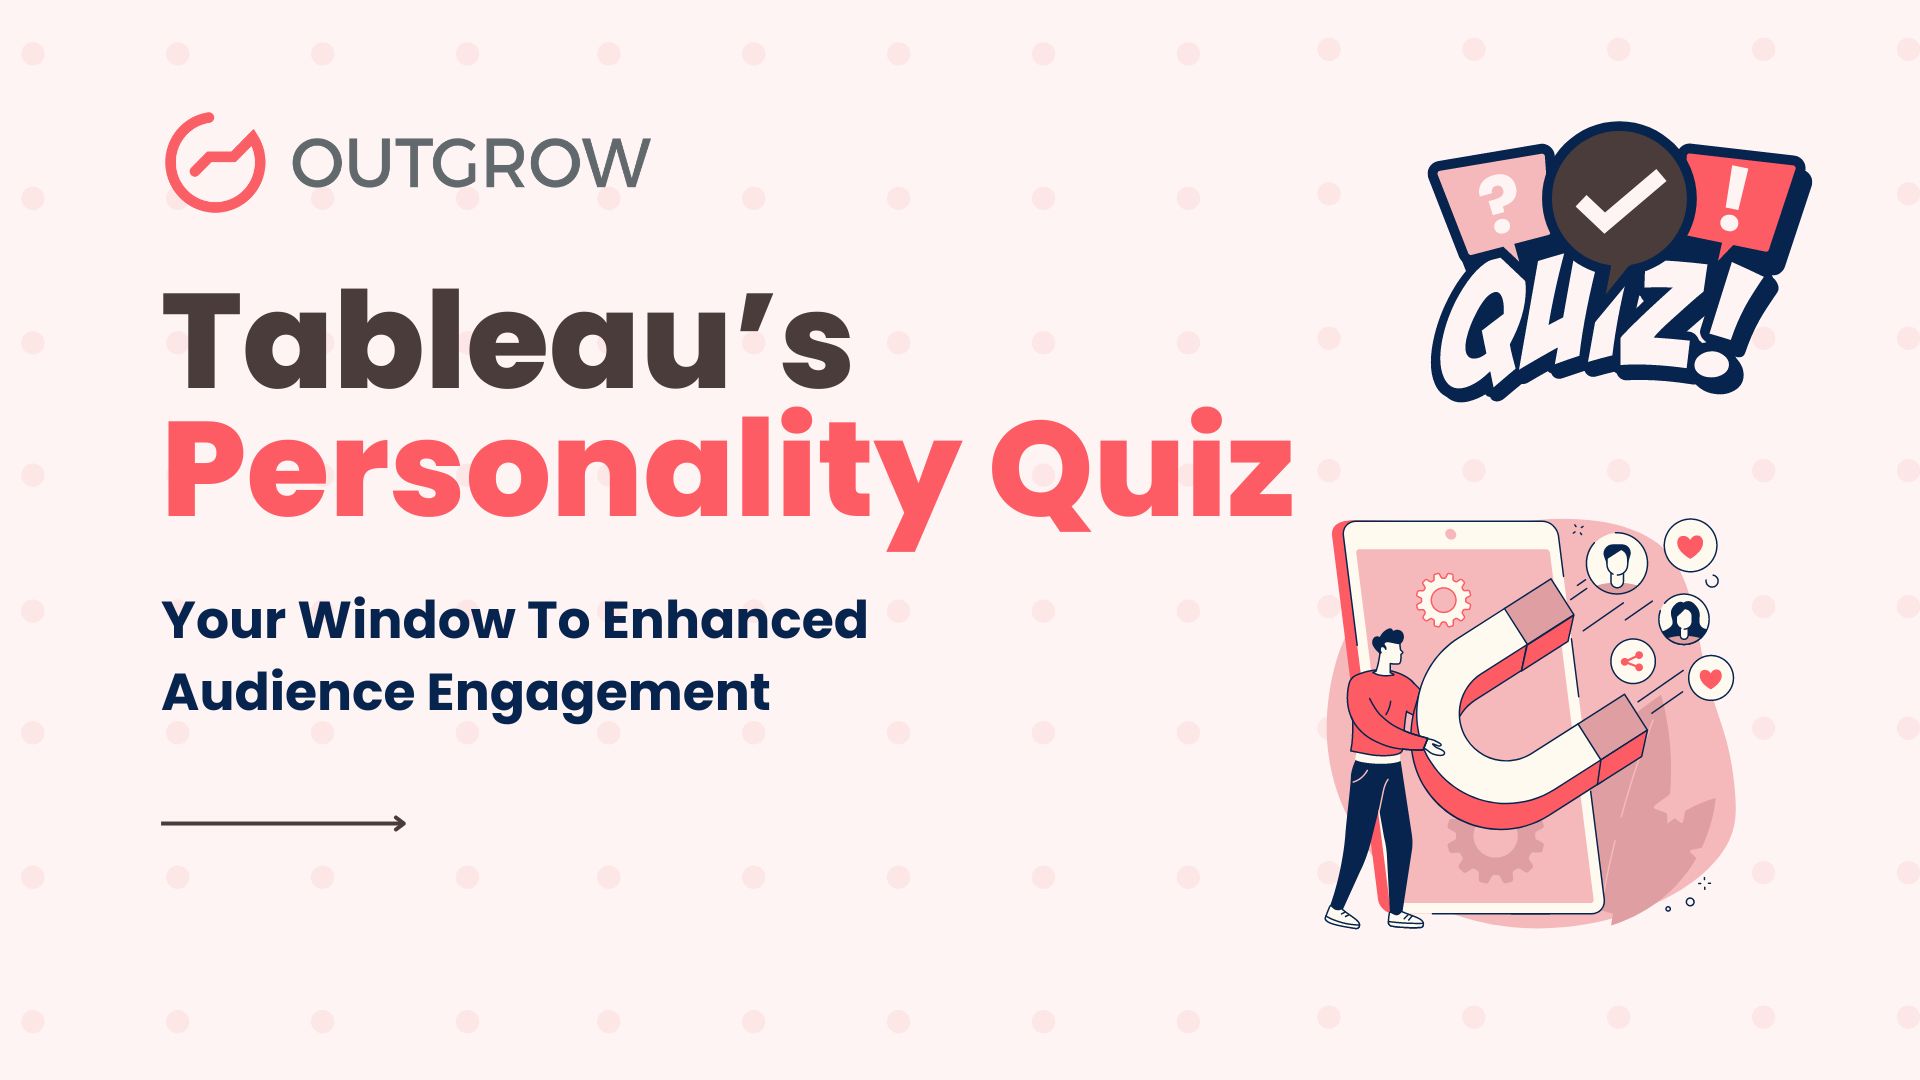 Tableau's personality quiz: your window to enhanced audience engagement